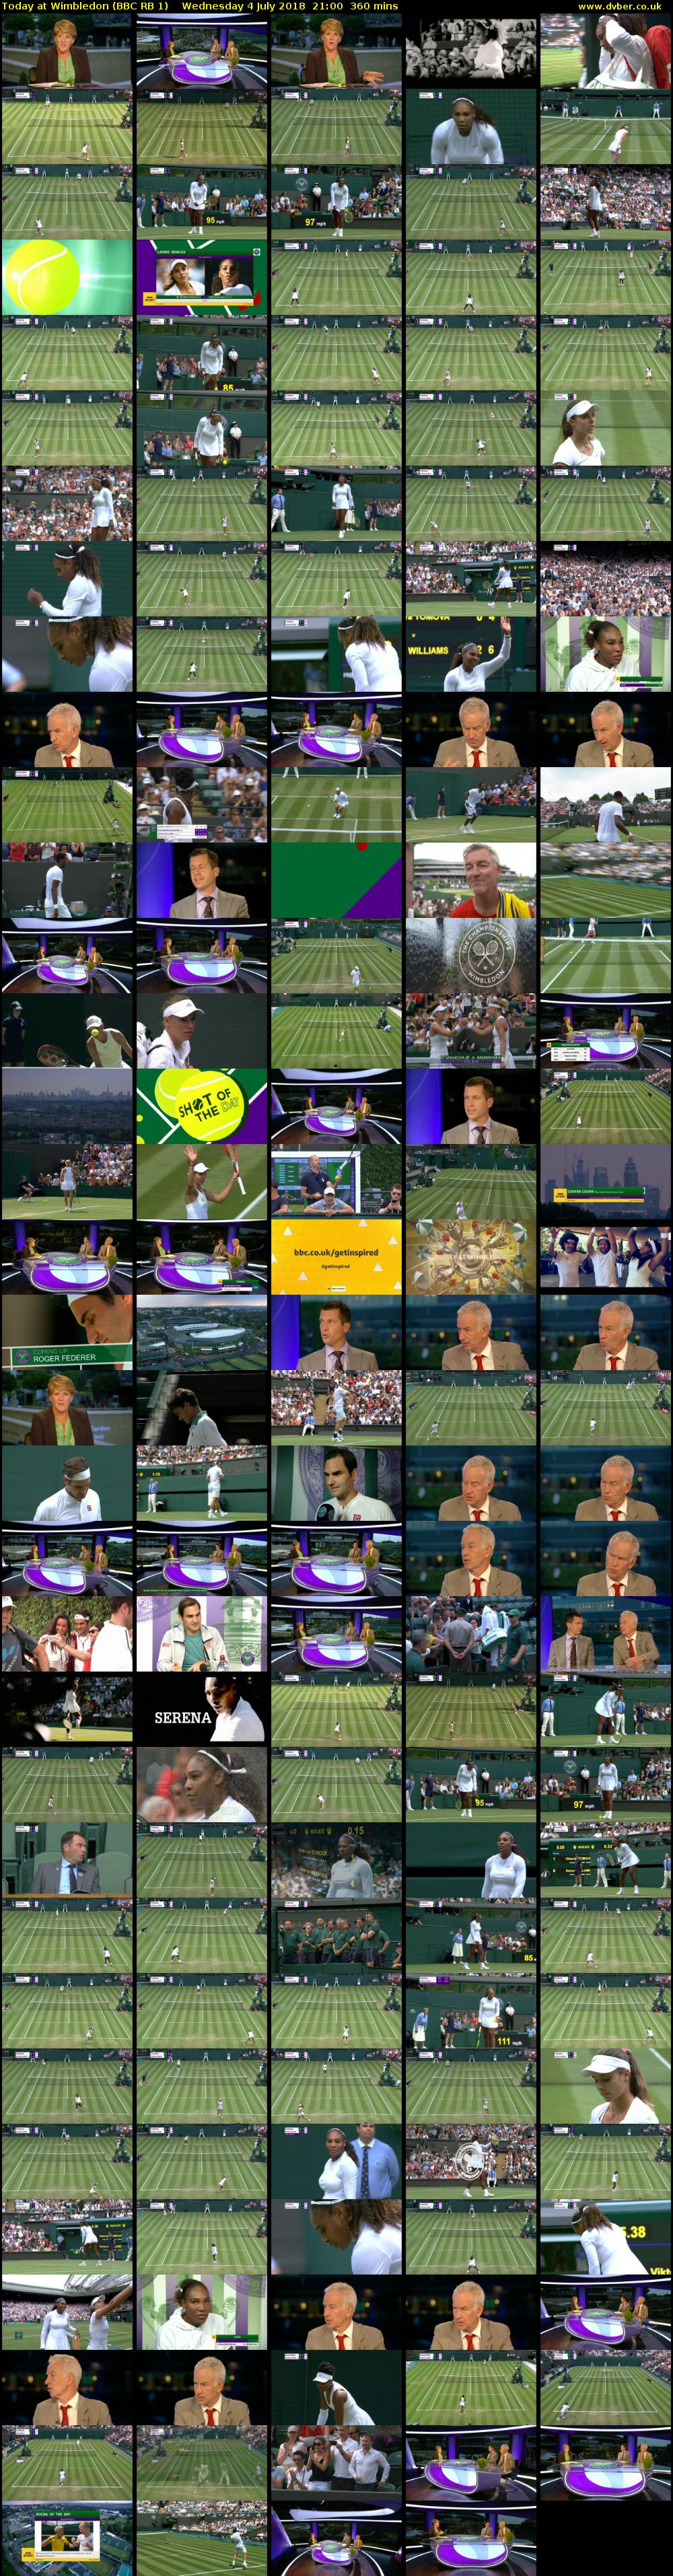 Today at Wimbledon (BBC RB 1) Wednesday 4 July 2018 21:00 - 03:00